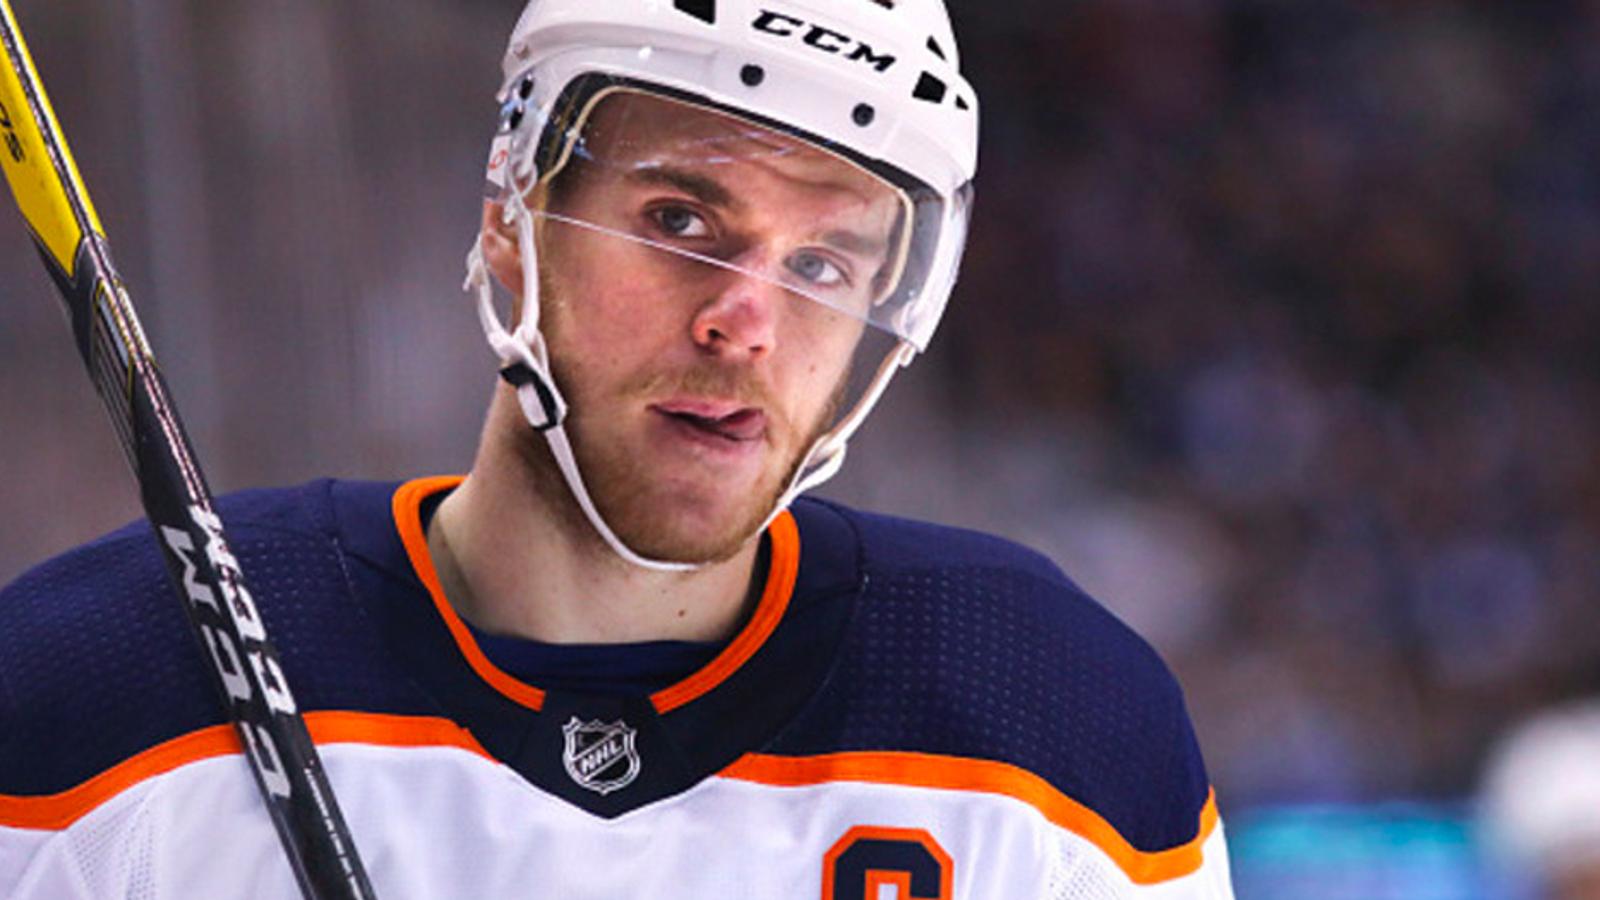 Oilers fans turn on McDavid after Oilers swept by Jets